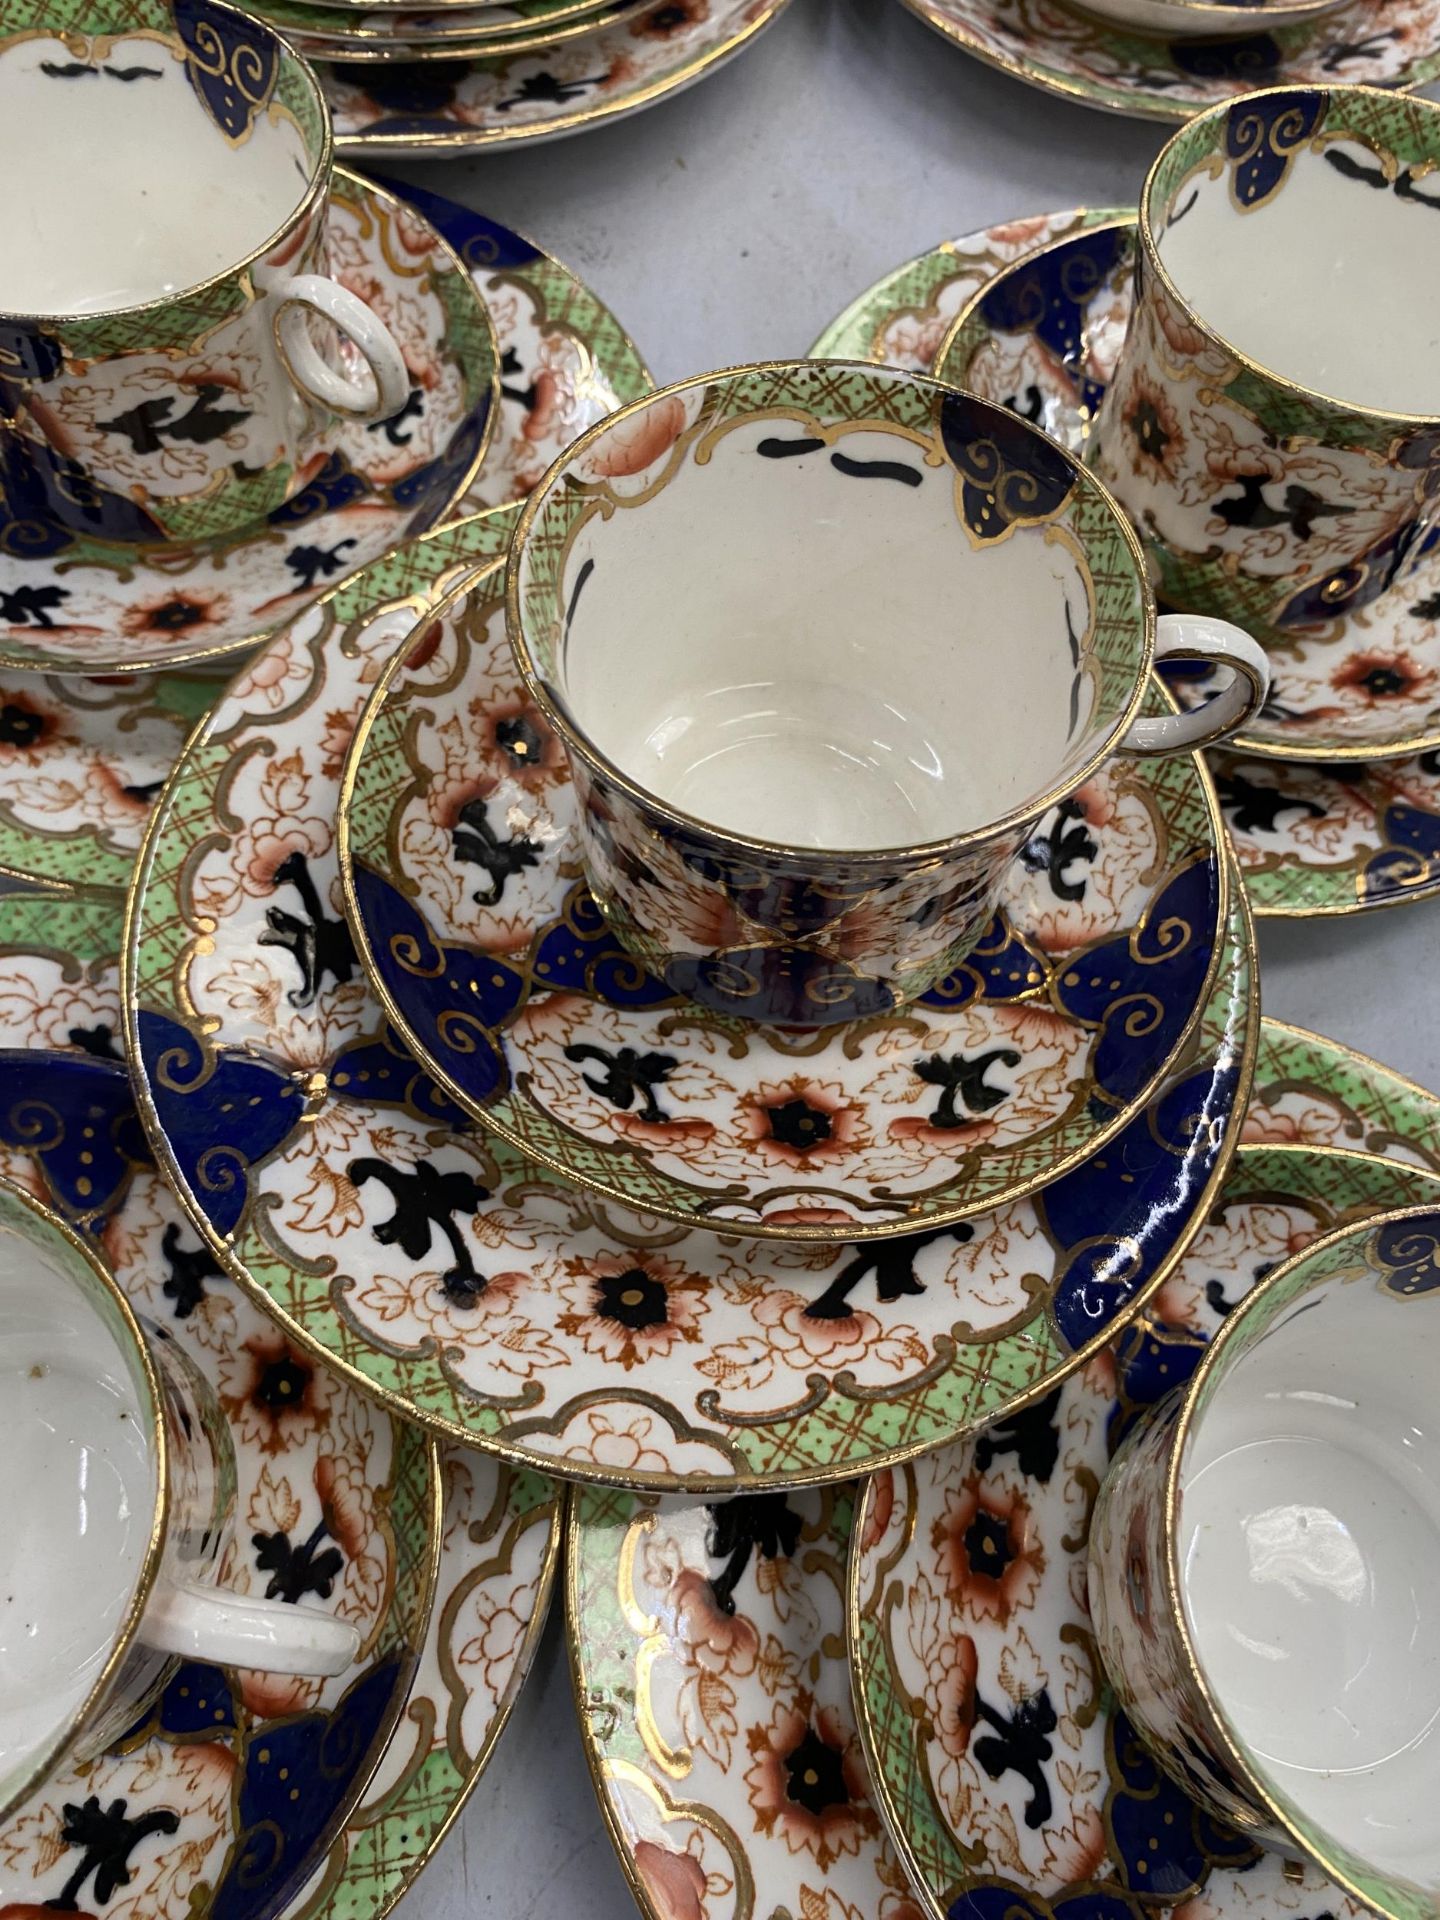 A COLLECTION OF VINTAGE ROYAL STAFFORD CUPS, SAUCERS AND SIDE PLATES - Image 3 of 3